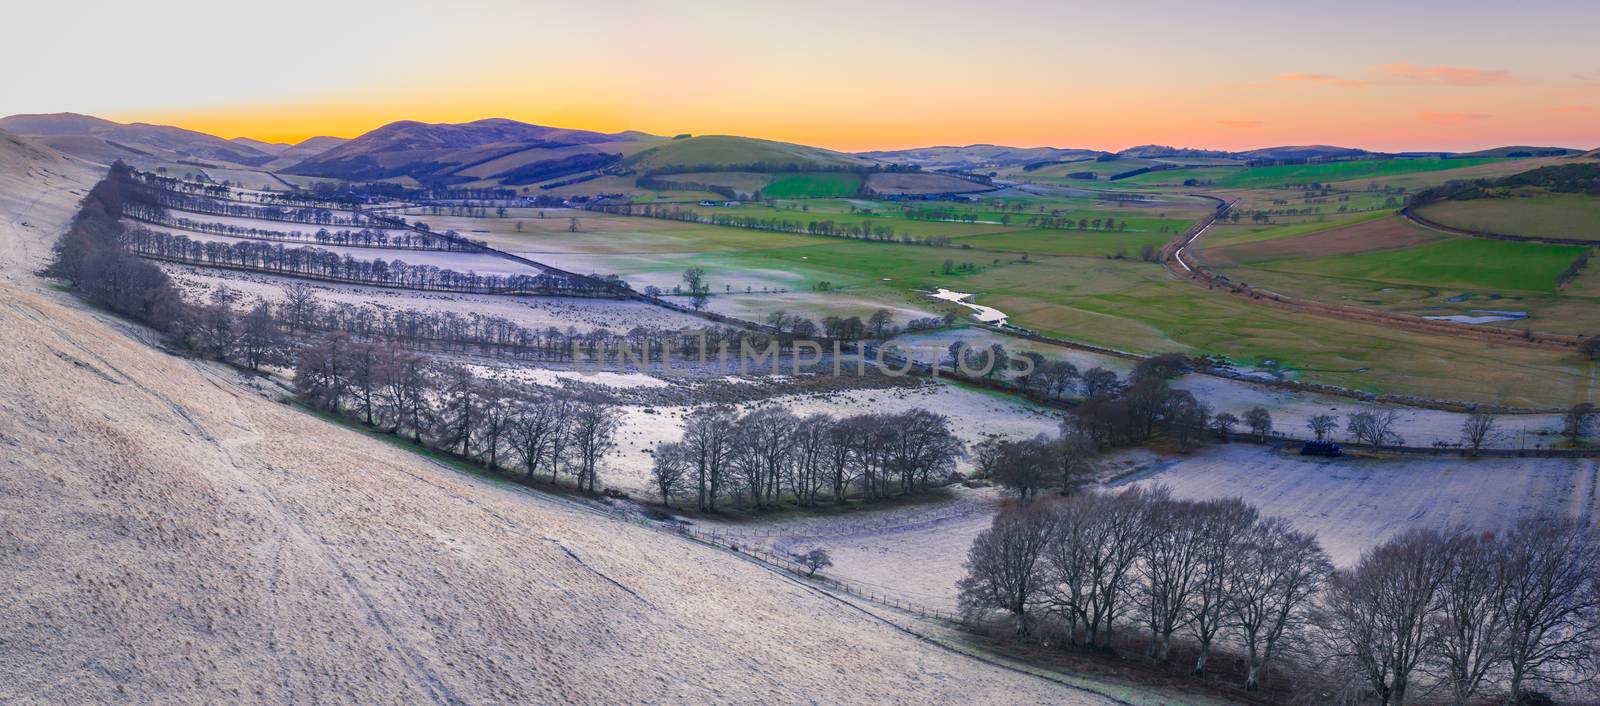 Panorama Of A Frosty Winter Landscape In The Hilly Scottish Borders At Sunset